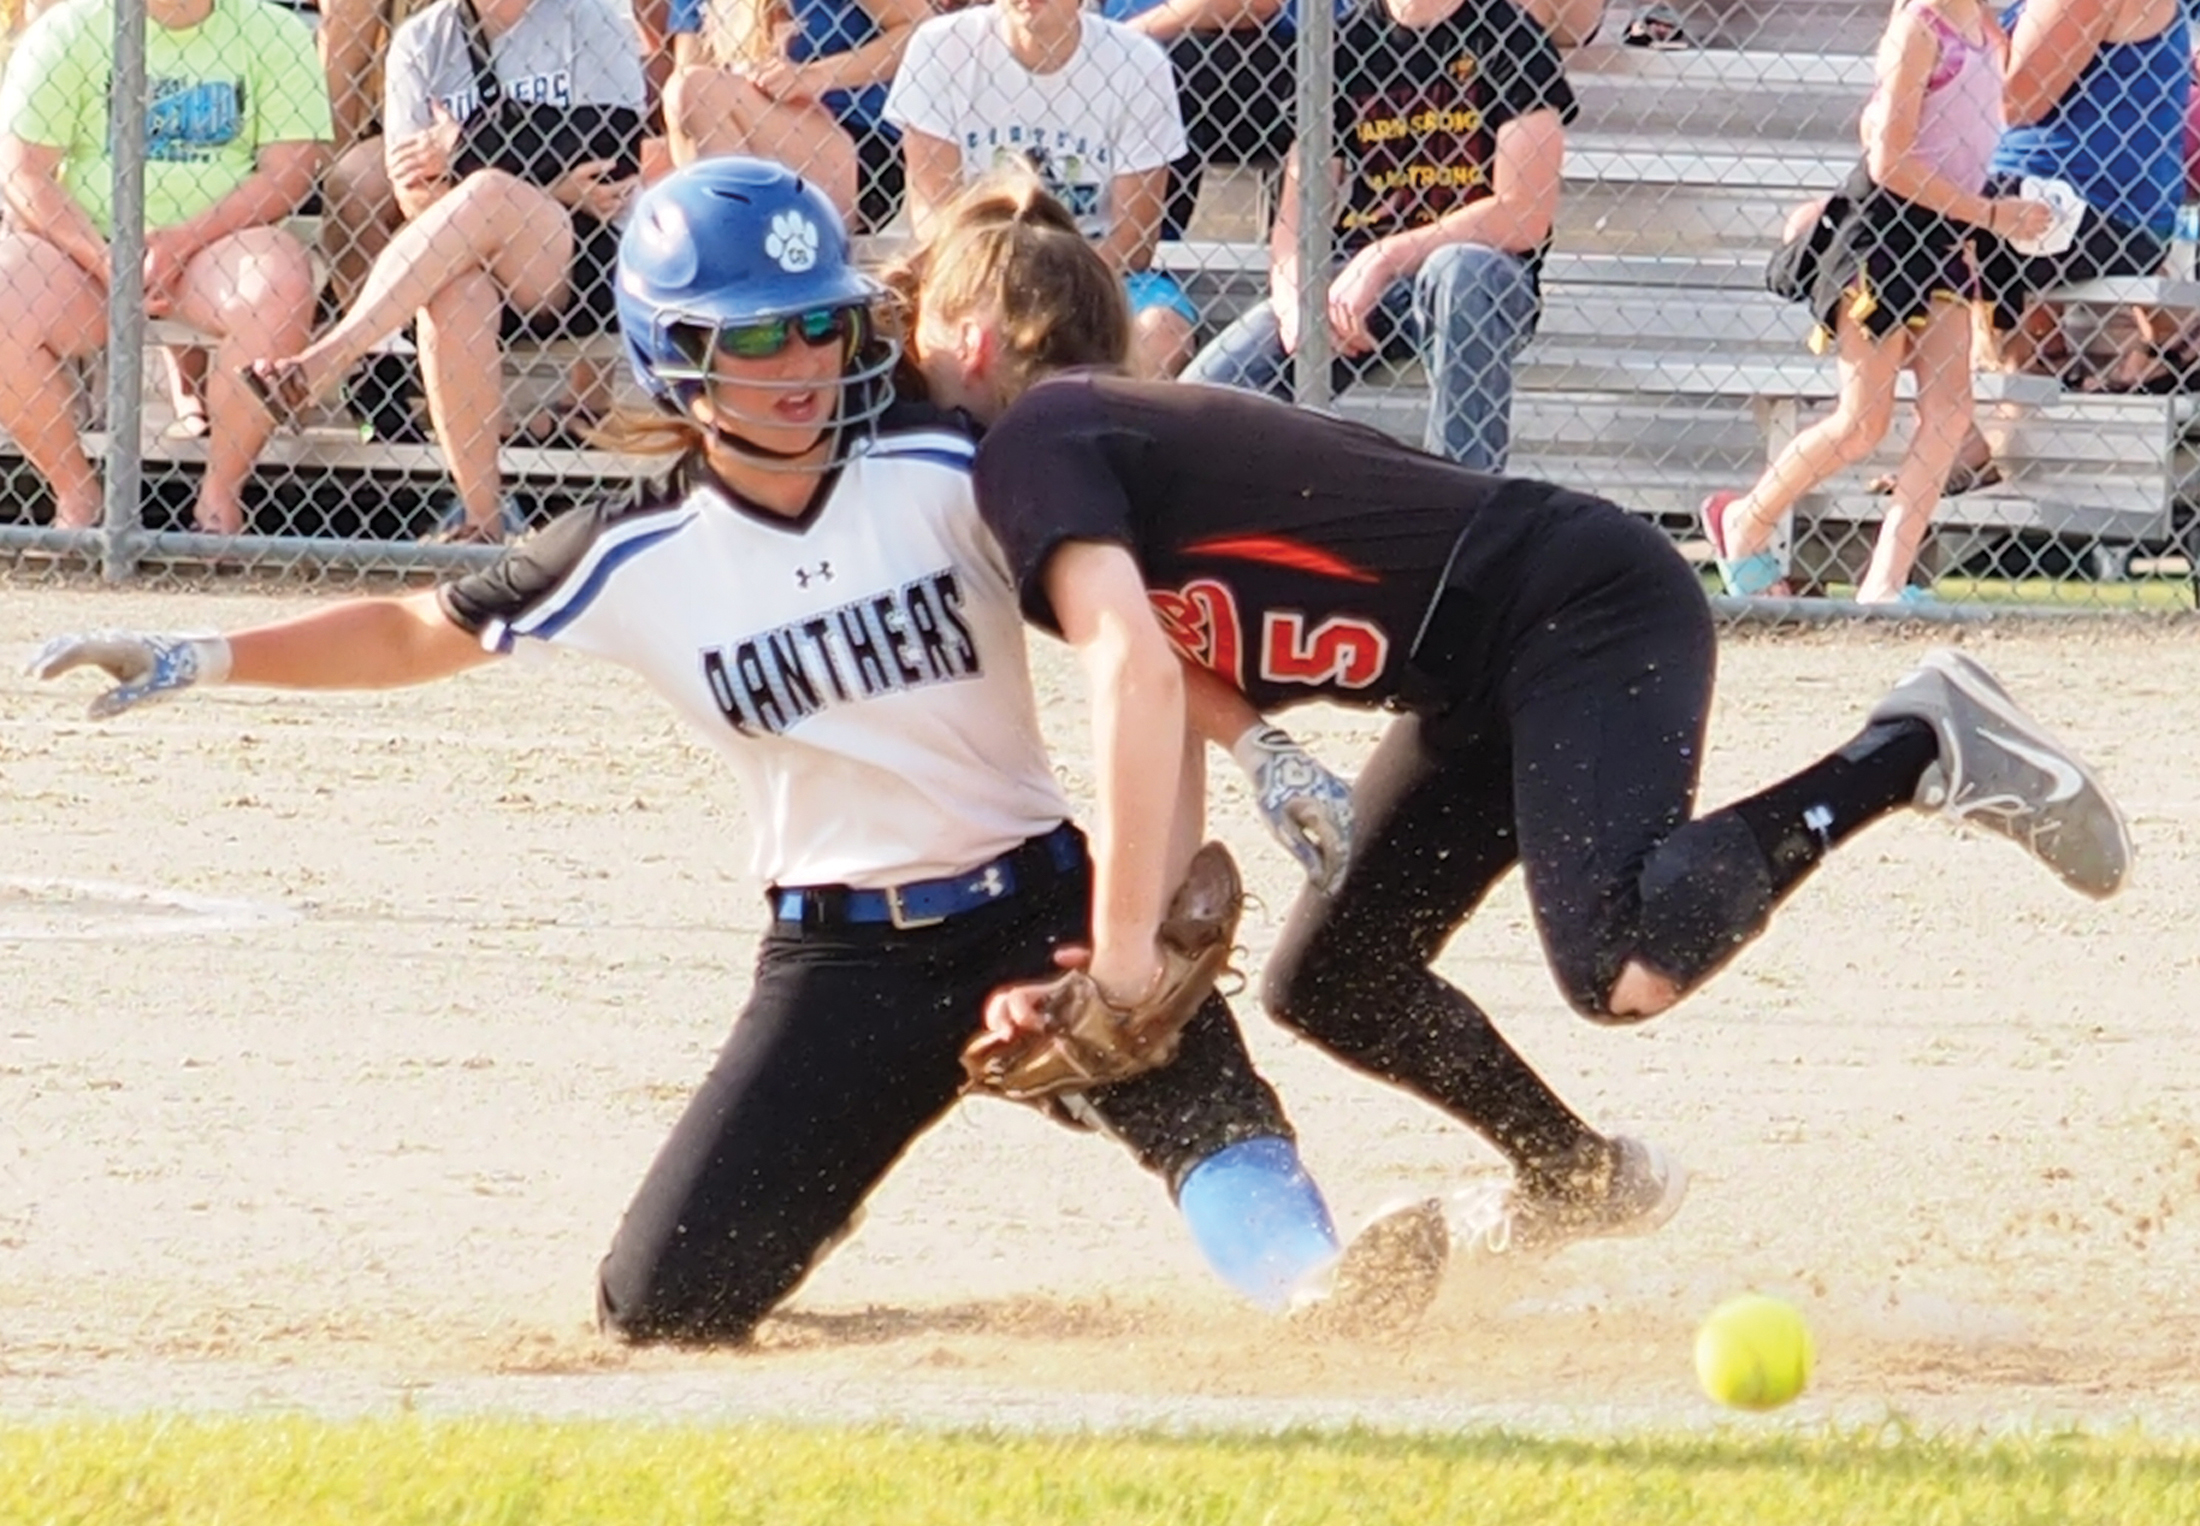 Schmidt’s homer leads Comets past previously undefeated Panthers, 5-1